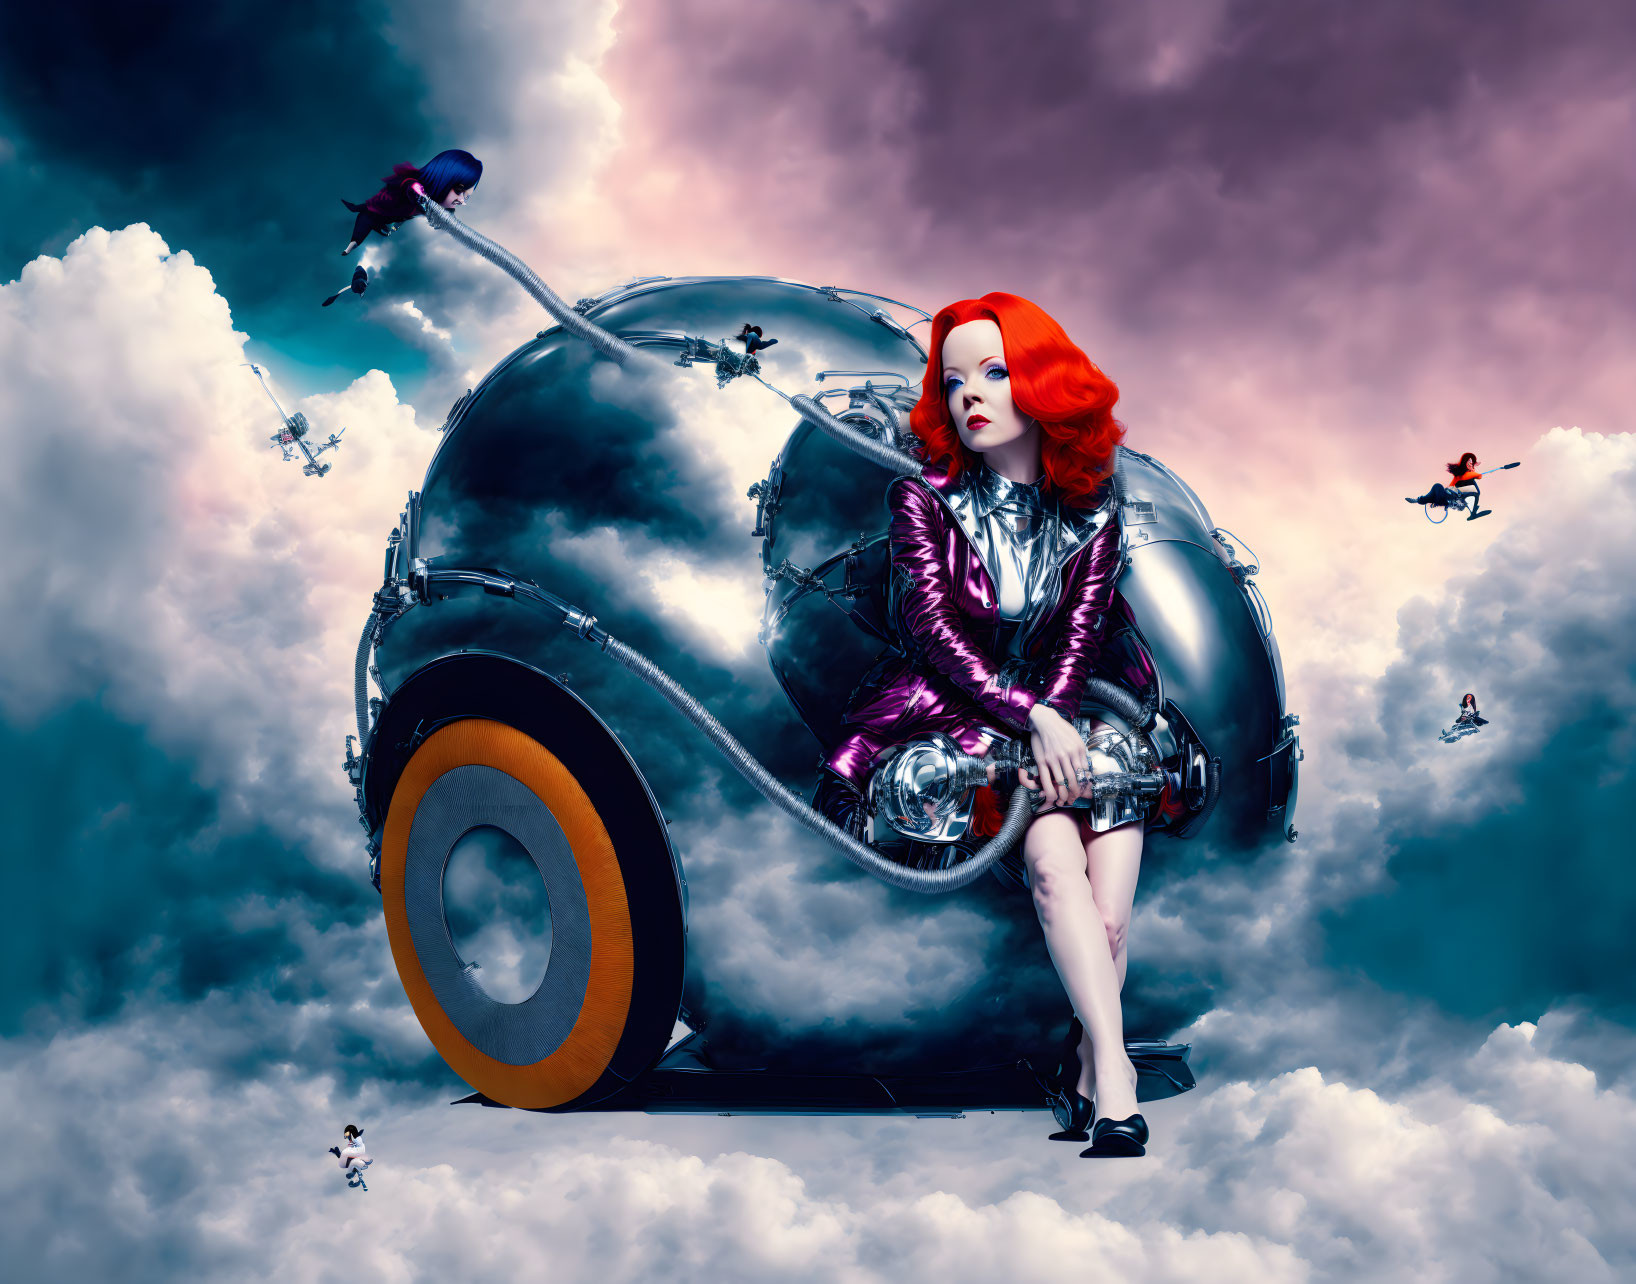 Red-haired woman on chrome beetle car under dramatic sky with flying figures.